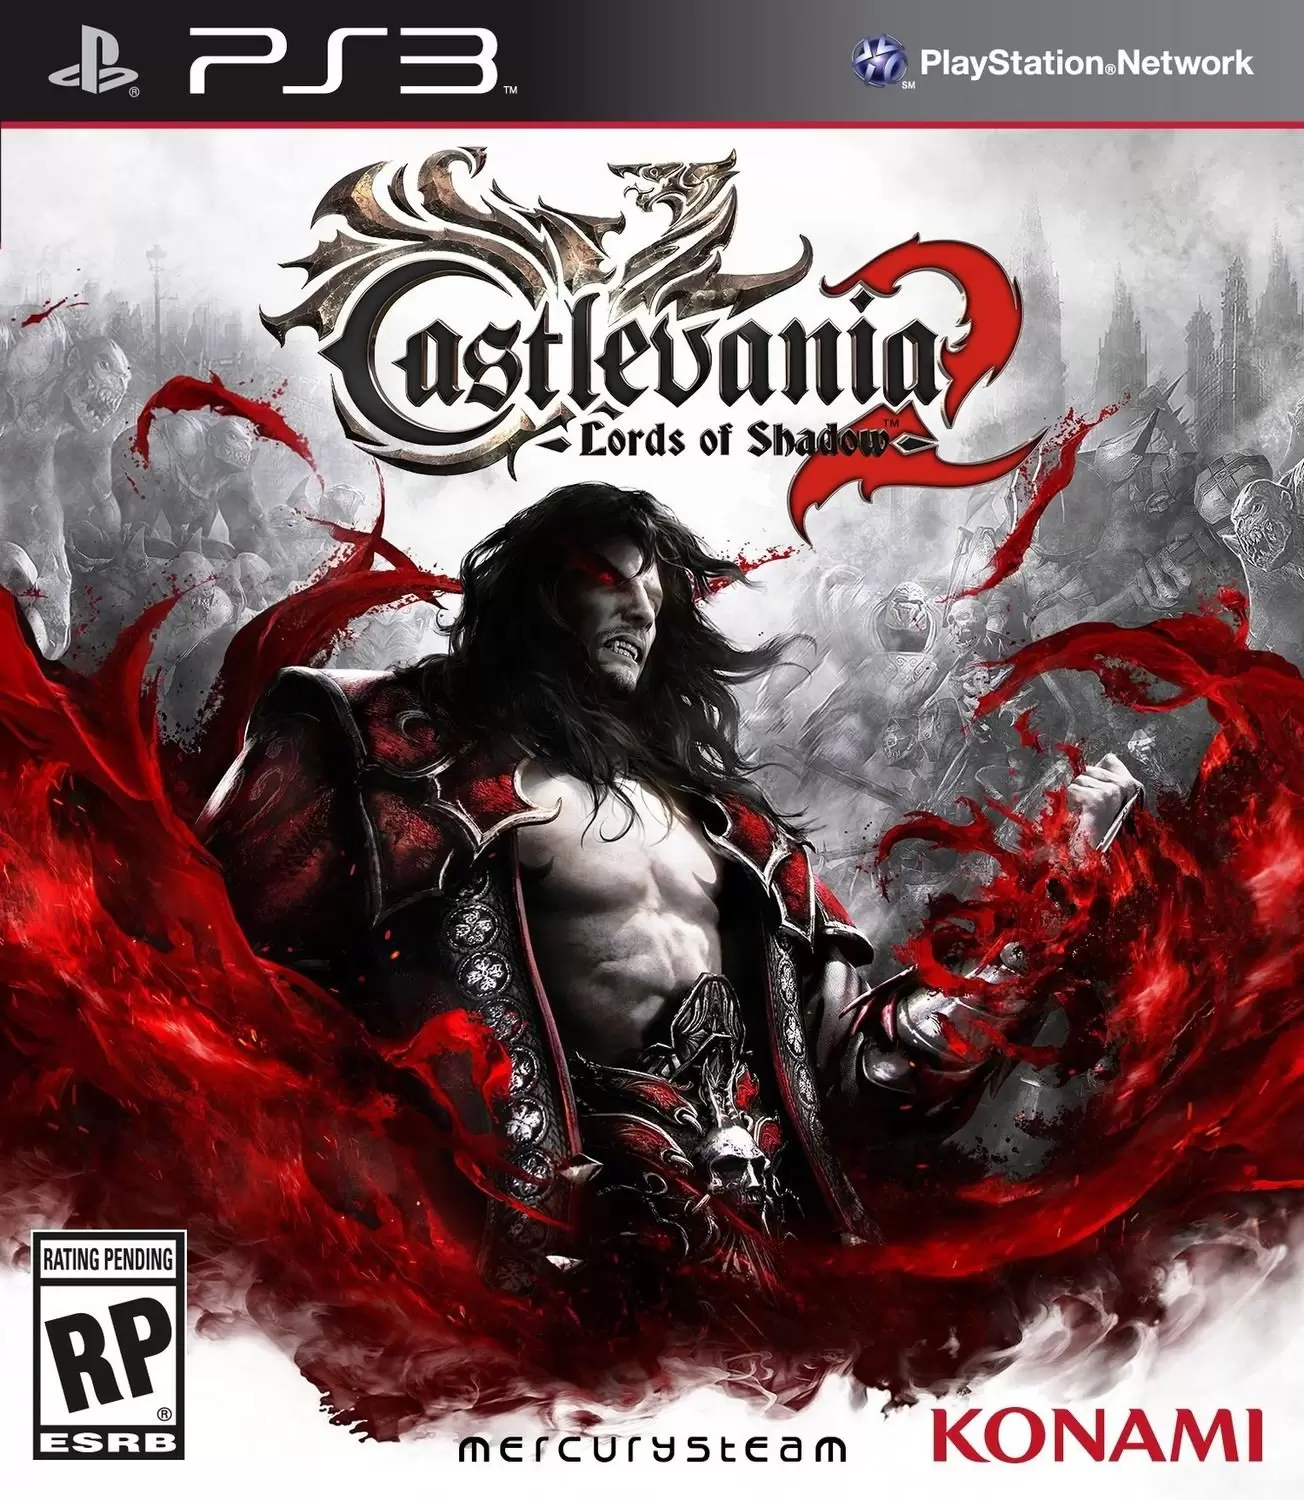 PS3 Games - Castlevania: Lords of Shadow 2